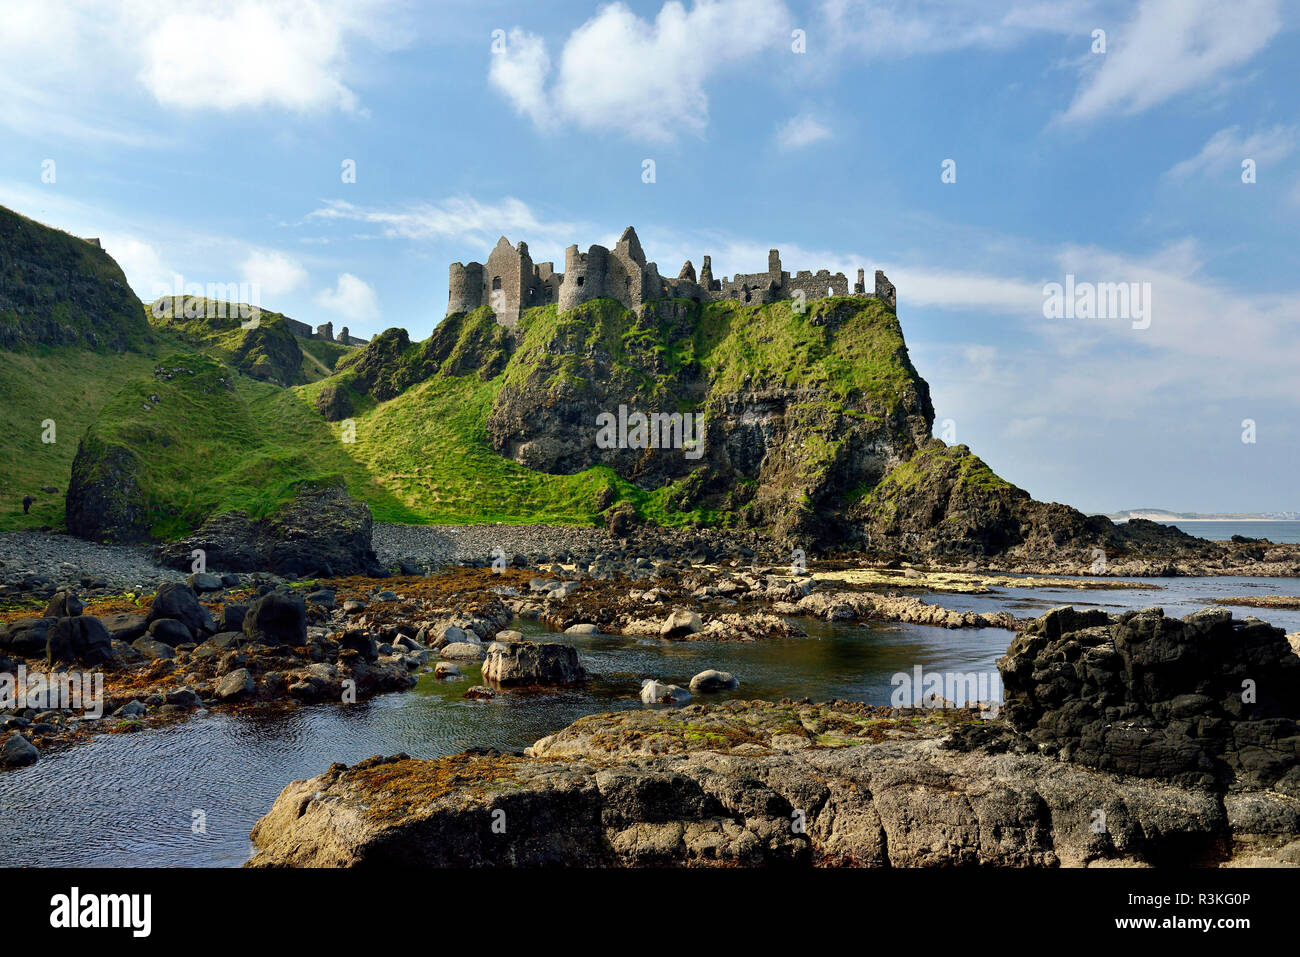 Ireland, Ulster, County Antrim, Bushmills: Dunluce Castle, Pyke Castle, Iron Islands, in the TV series Game of Thrones Stock Photo